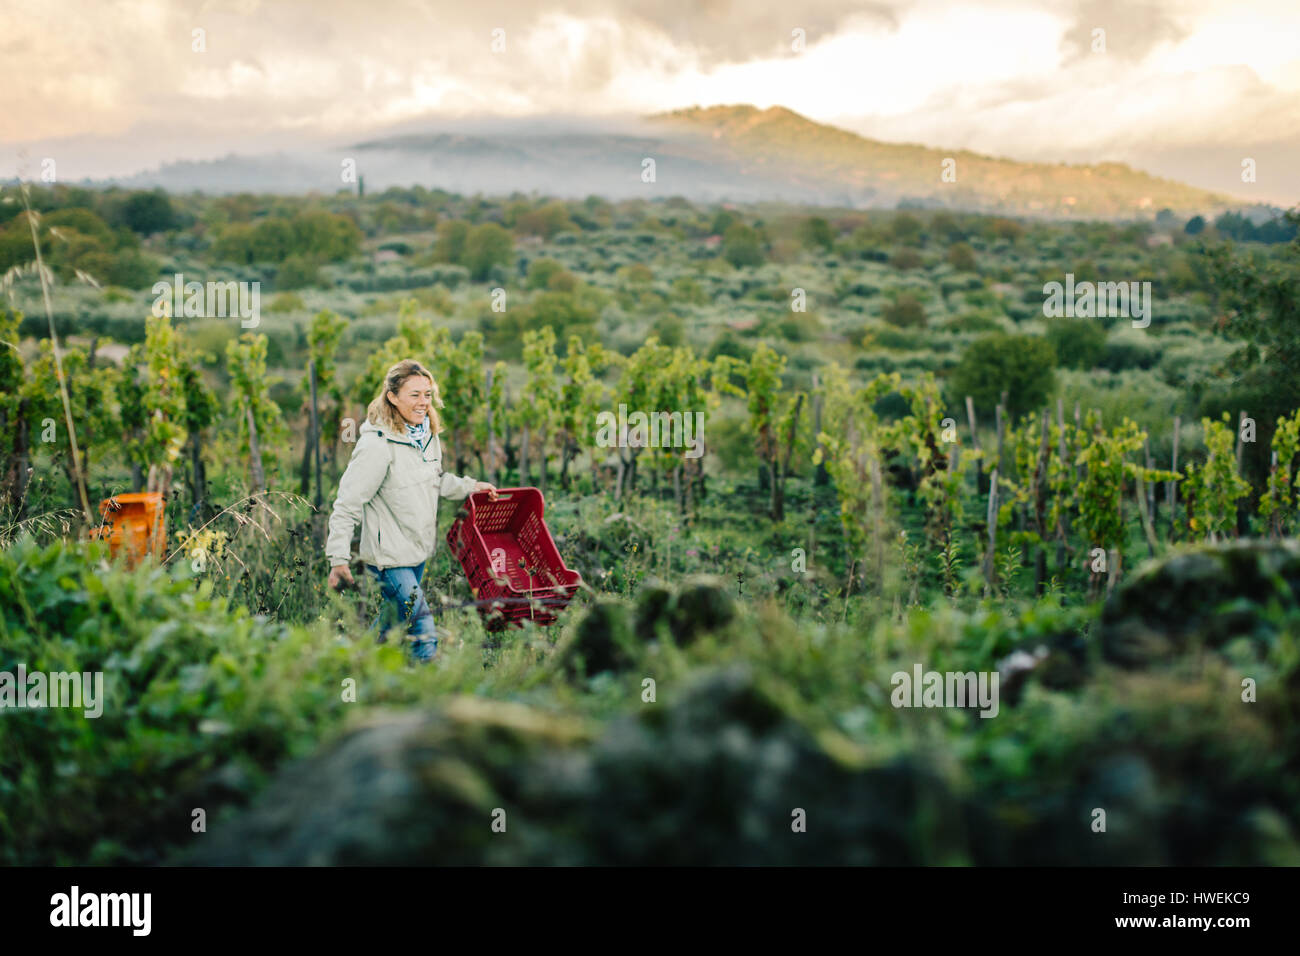 Woman carrying crate in vineyard Banque D'Images